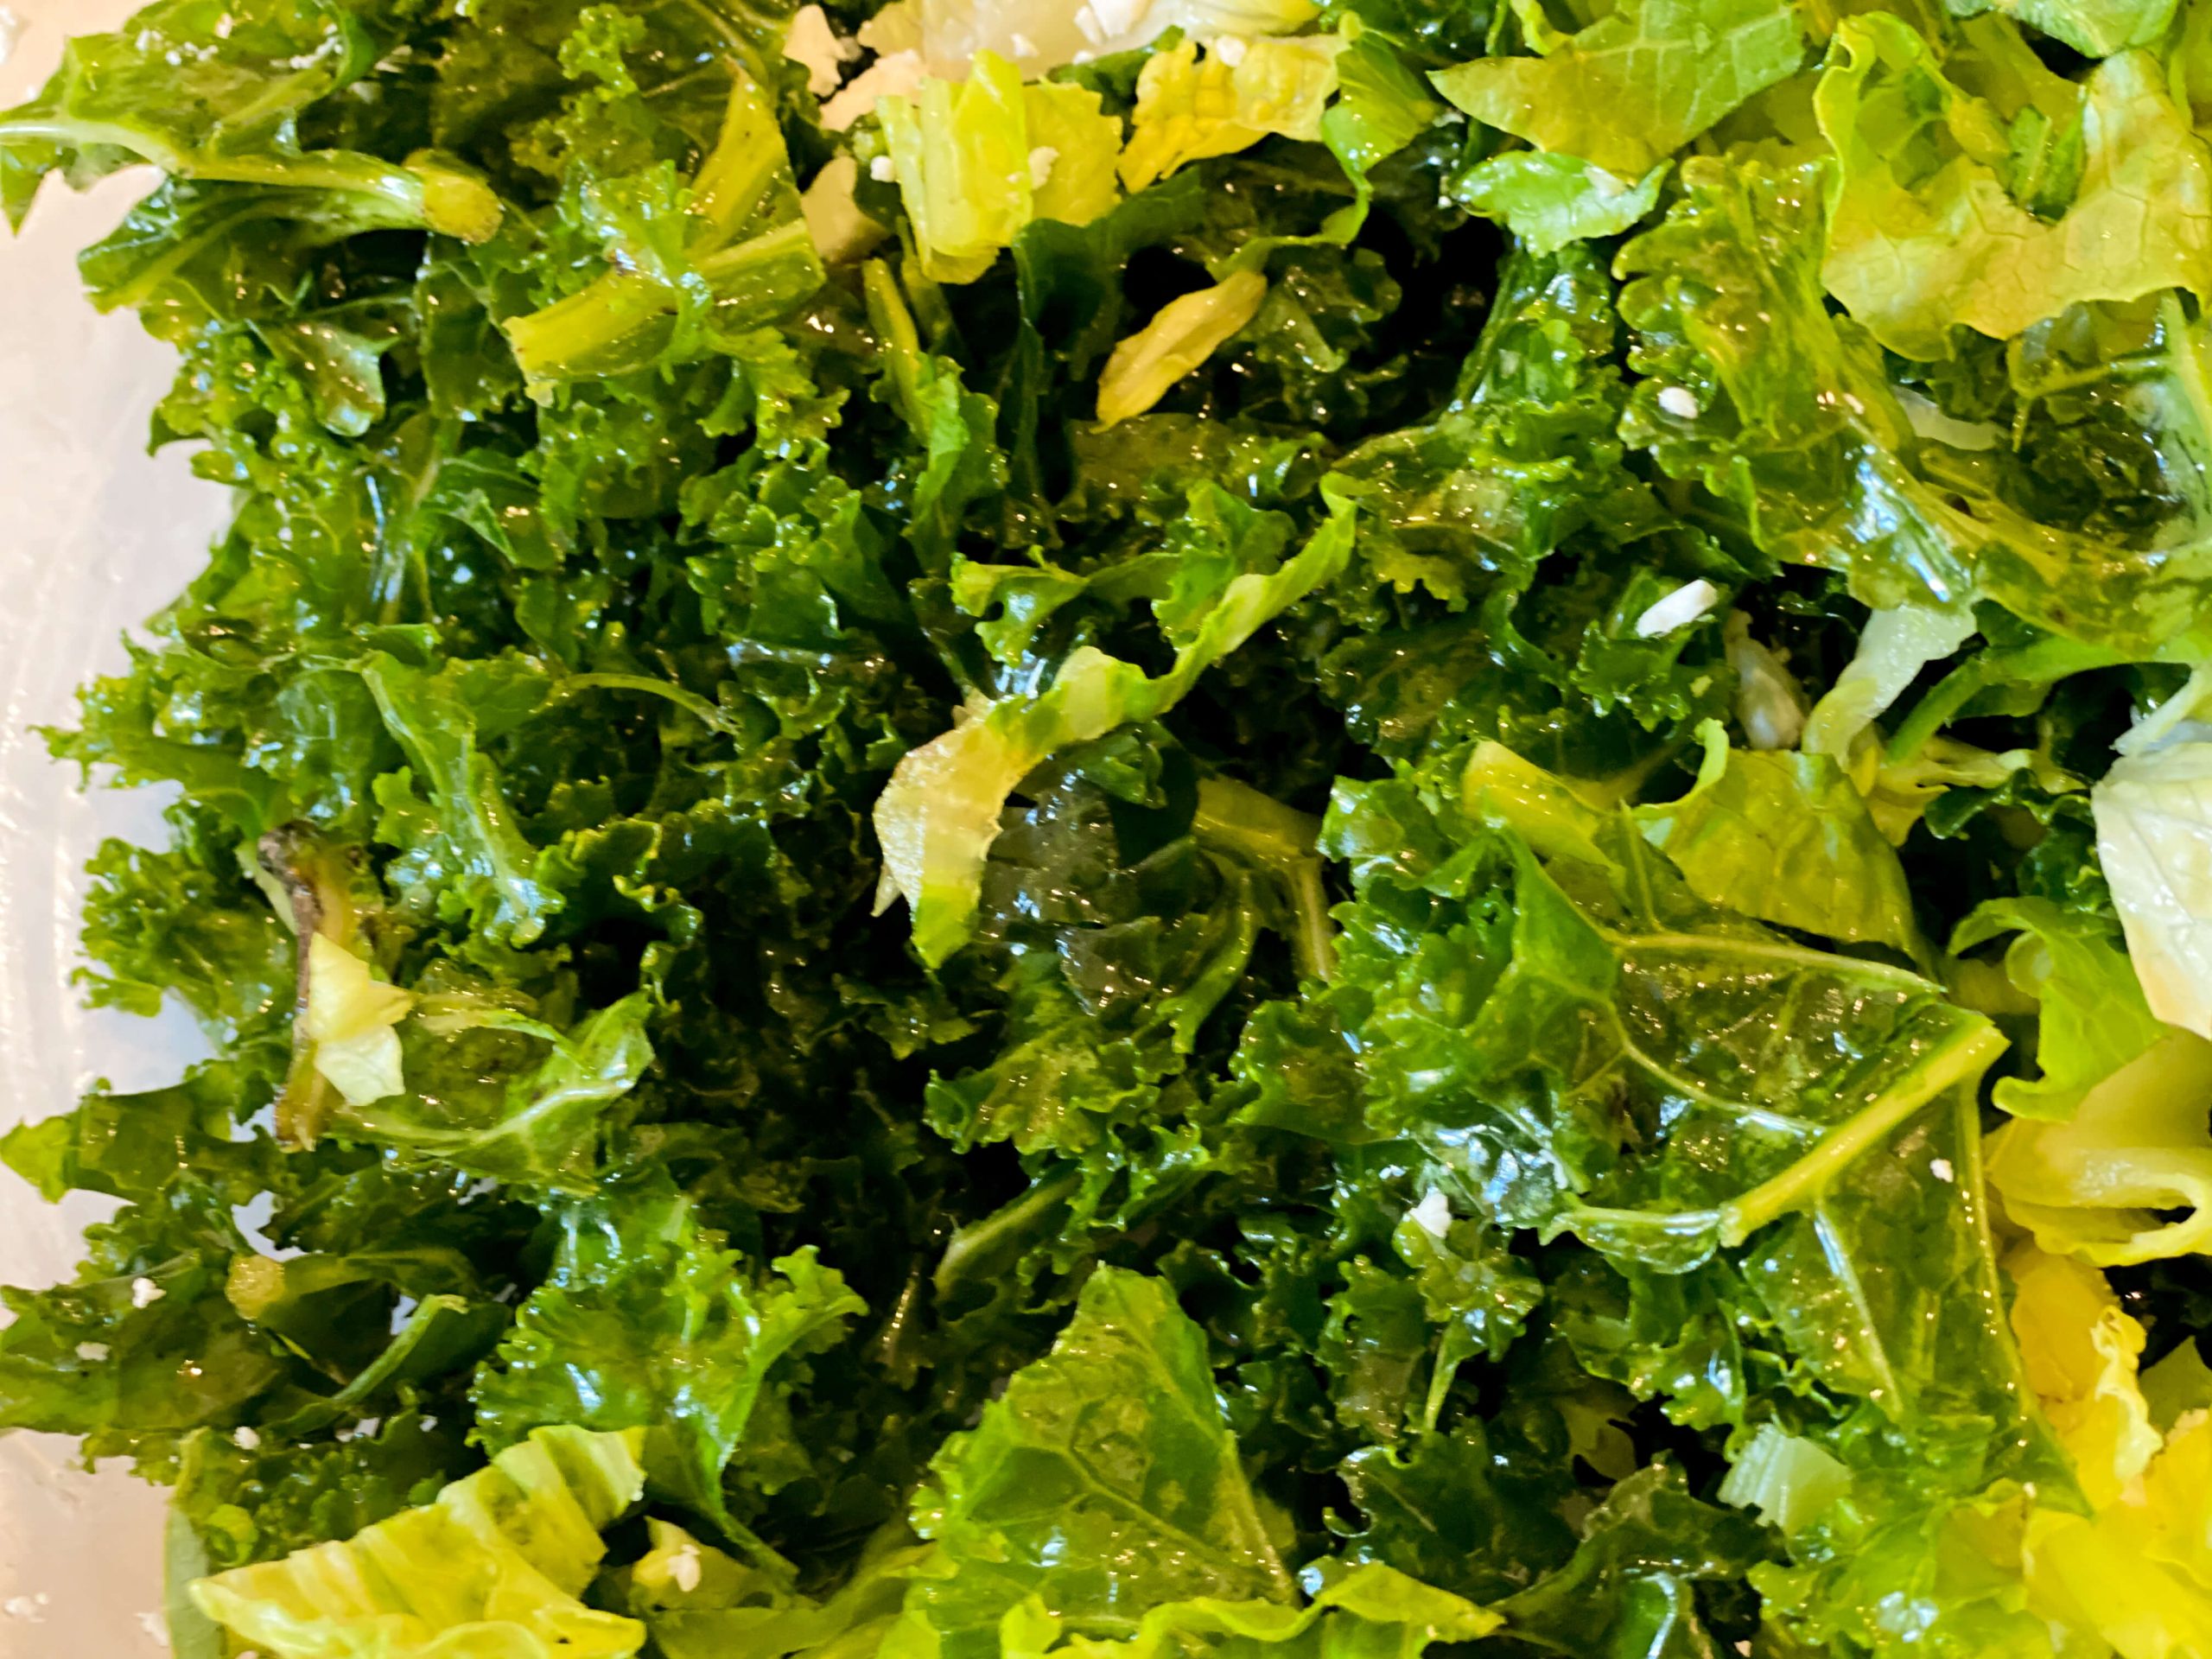 kale massaged and coated with olive oil and seasoning.